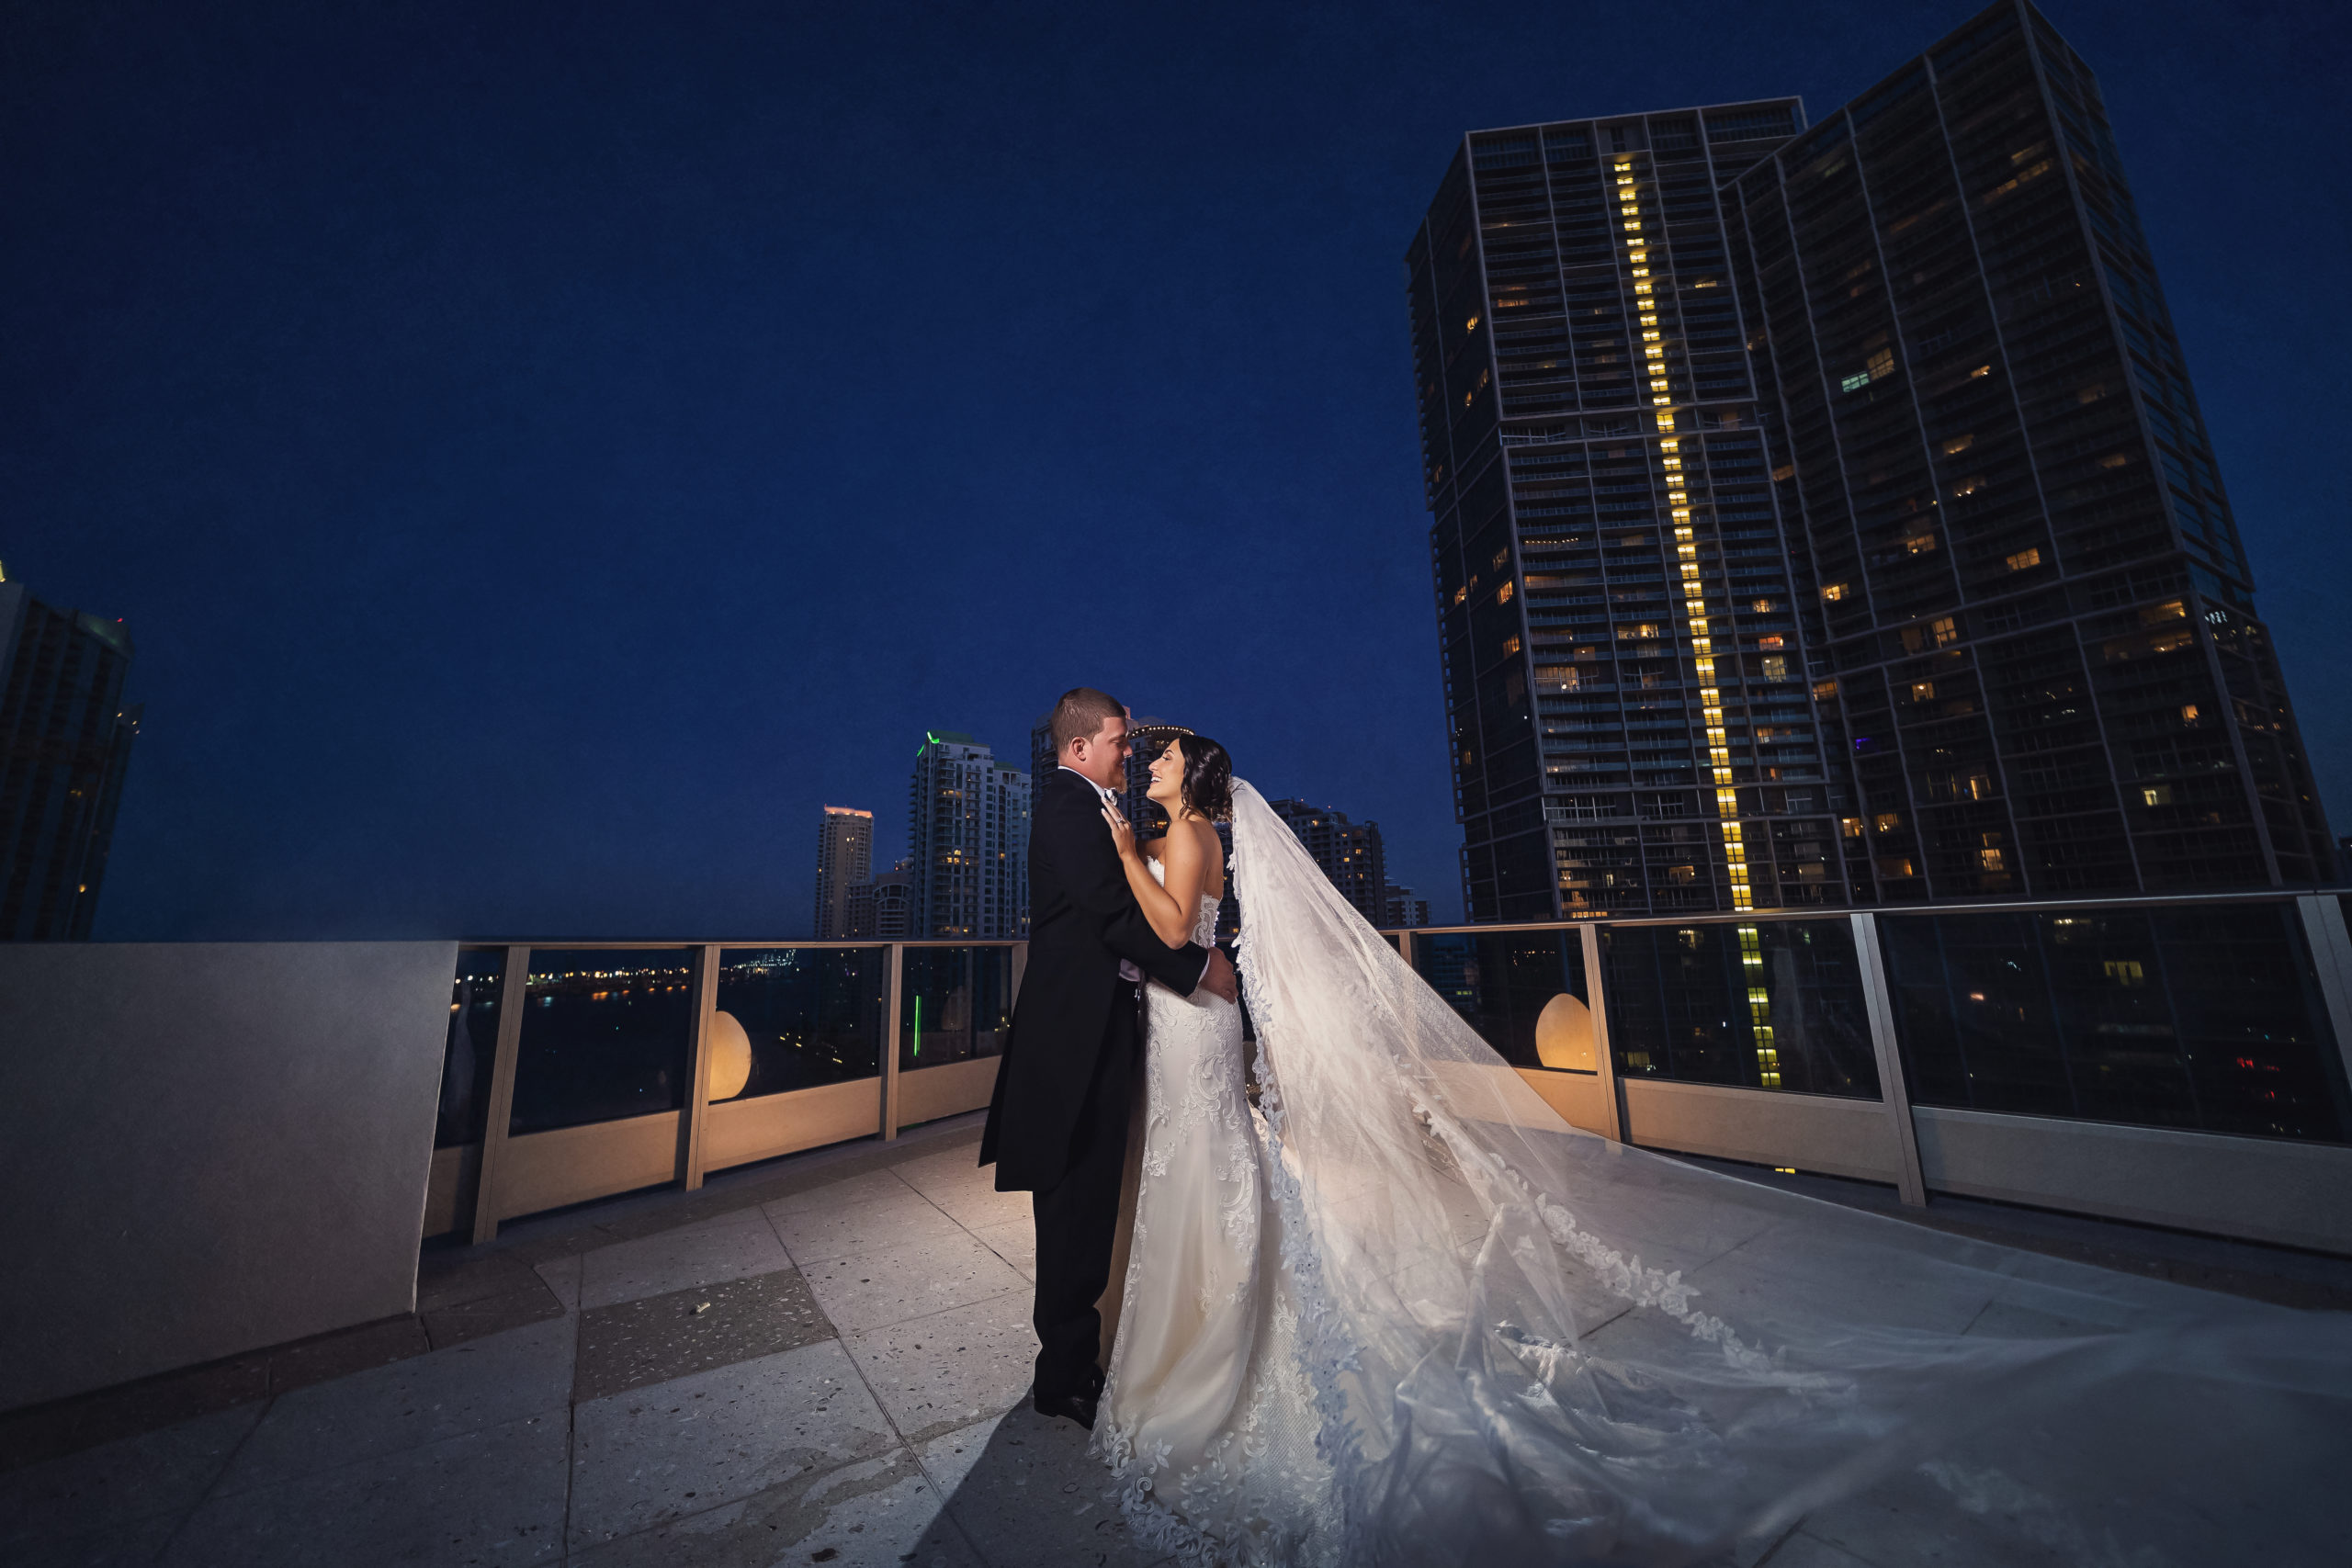 The bride and groom embracing outdoors under the dark sky on balcony at The Kimpton EPIC Hotel, wedding planned by Oh My Occasions